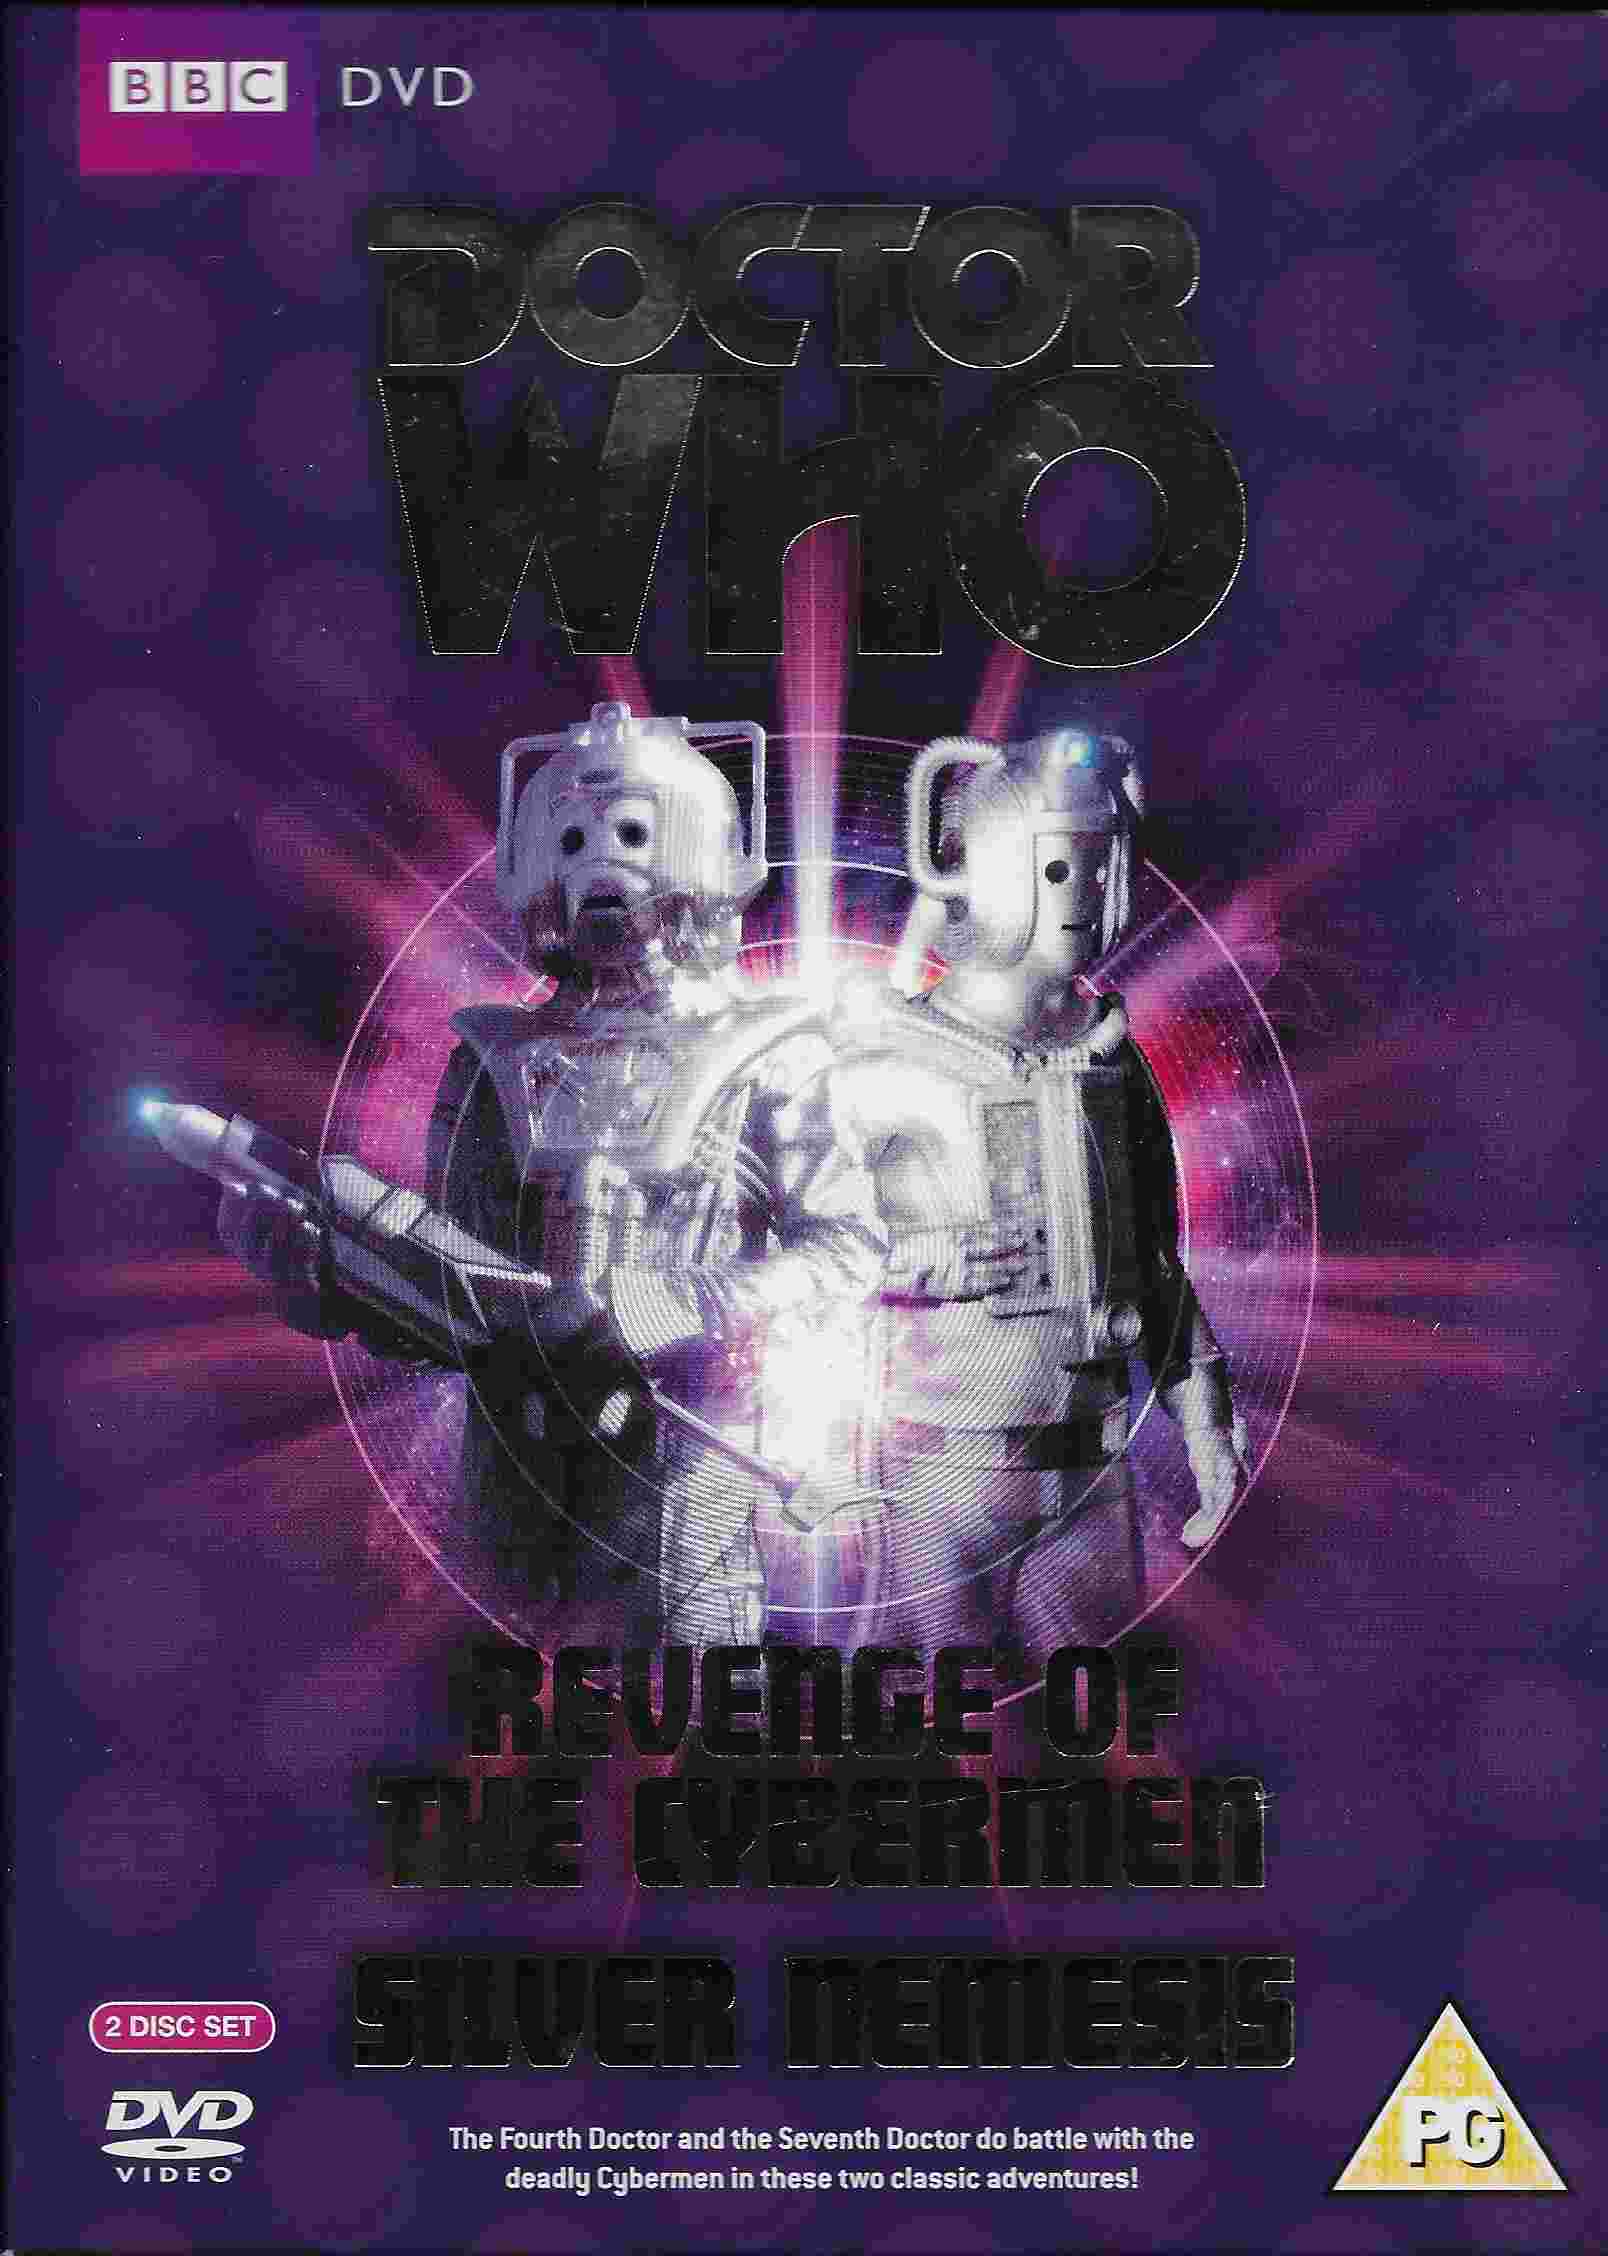 Picture of BBCDVD 2854 Doctor Who - Revenge of the Cybermen / Silver nemesis by artist Gerry Davis / Kevin Clarke from the BBC records and Tapes library